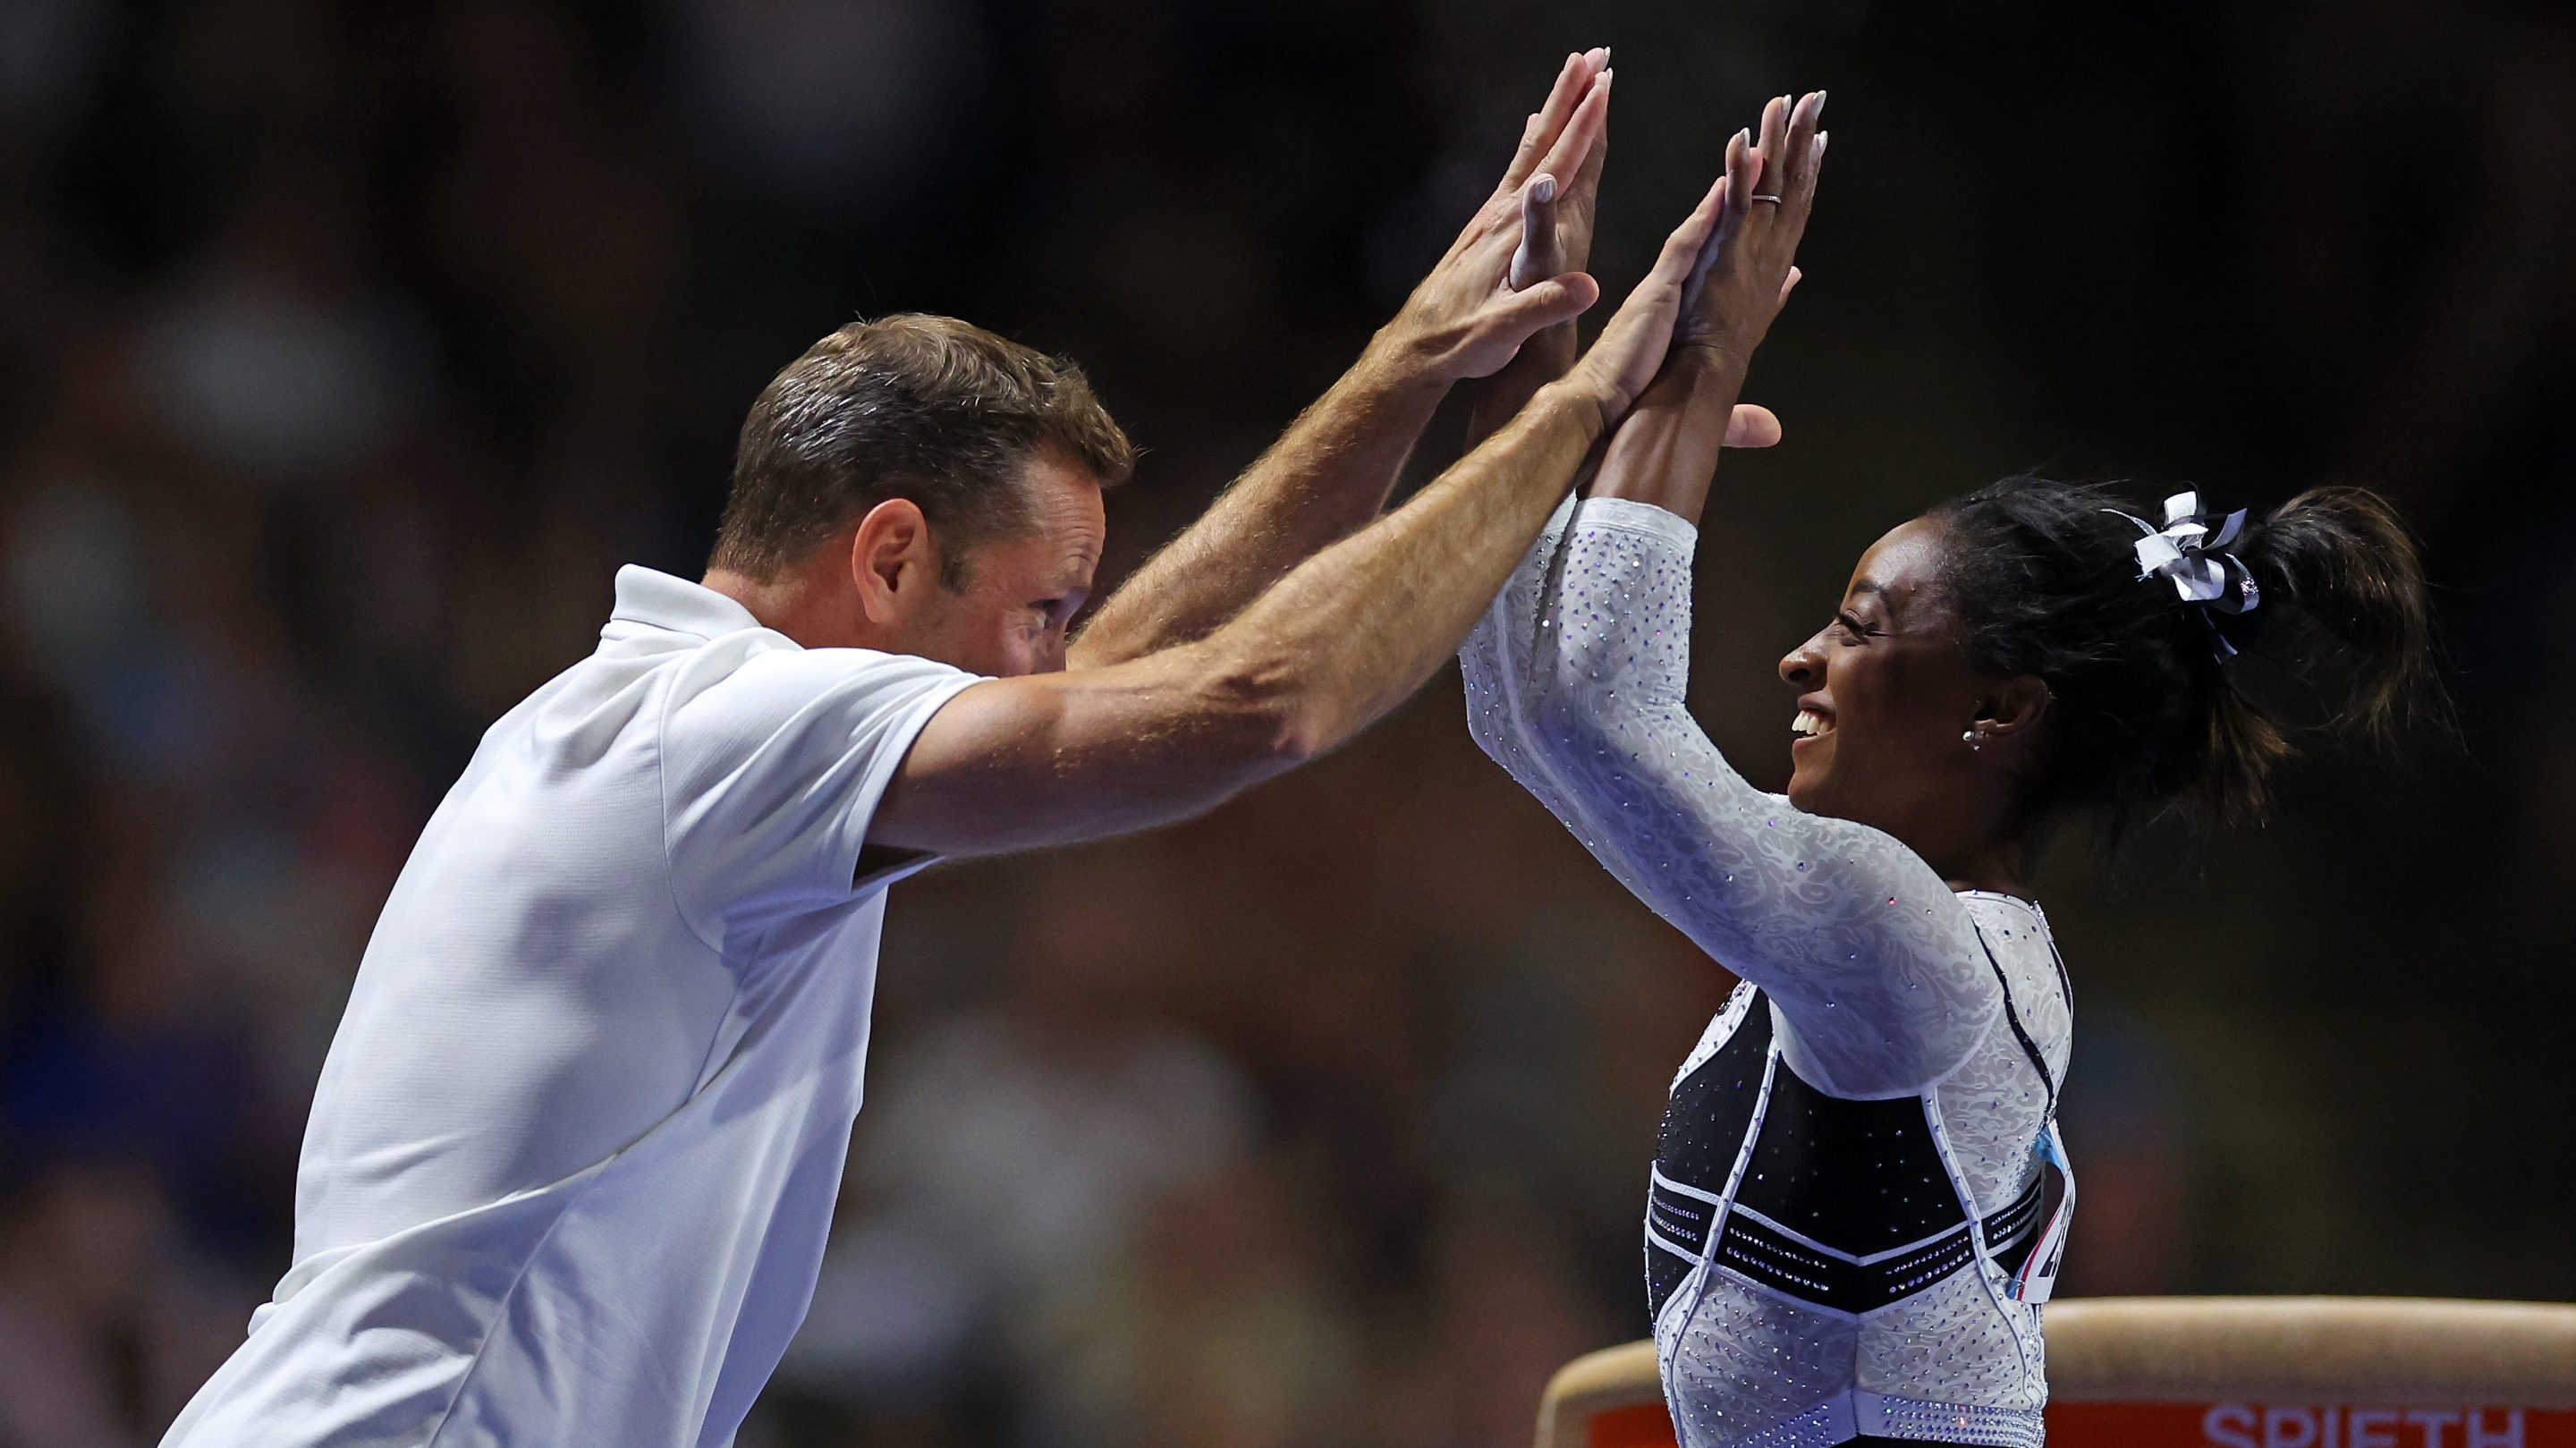 Simone Biles celebrates with her coach Laurent Landi after competing on the vault at the Core Hydration Classic at Now Arena on August 05, 2023 in Hoffman Estates, Illinois.